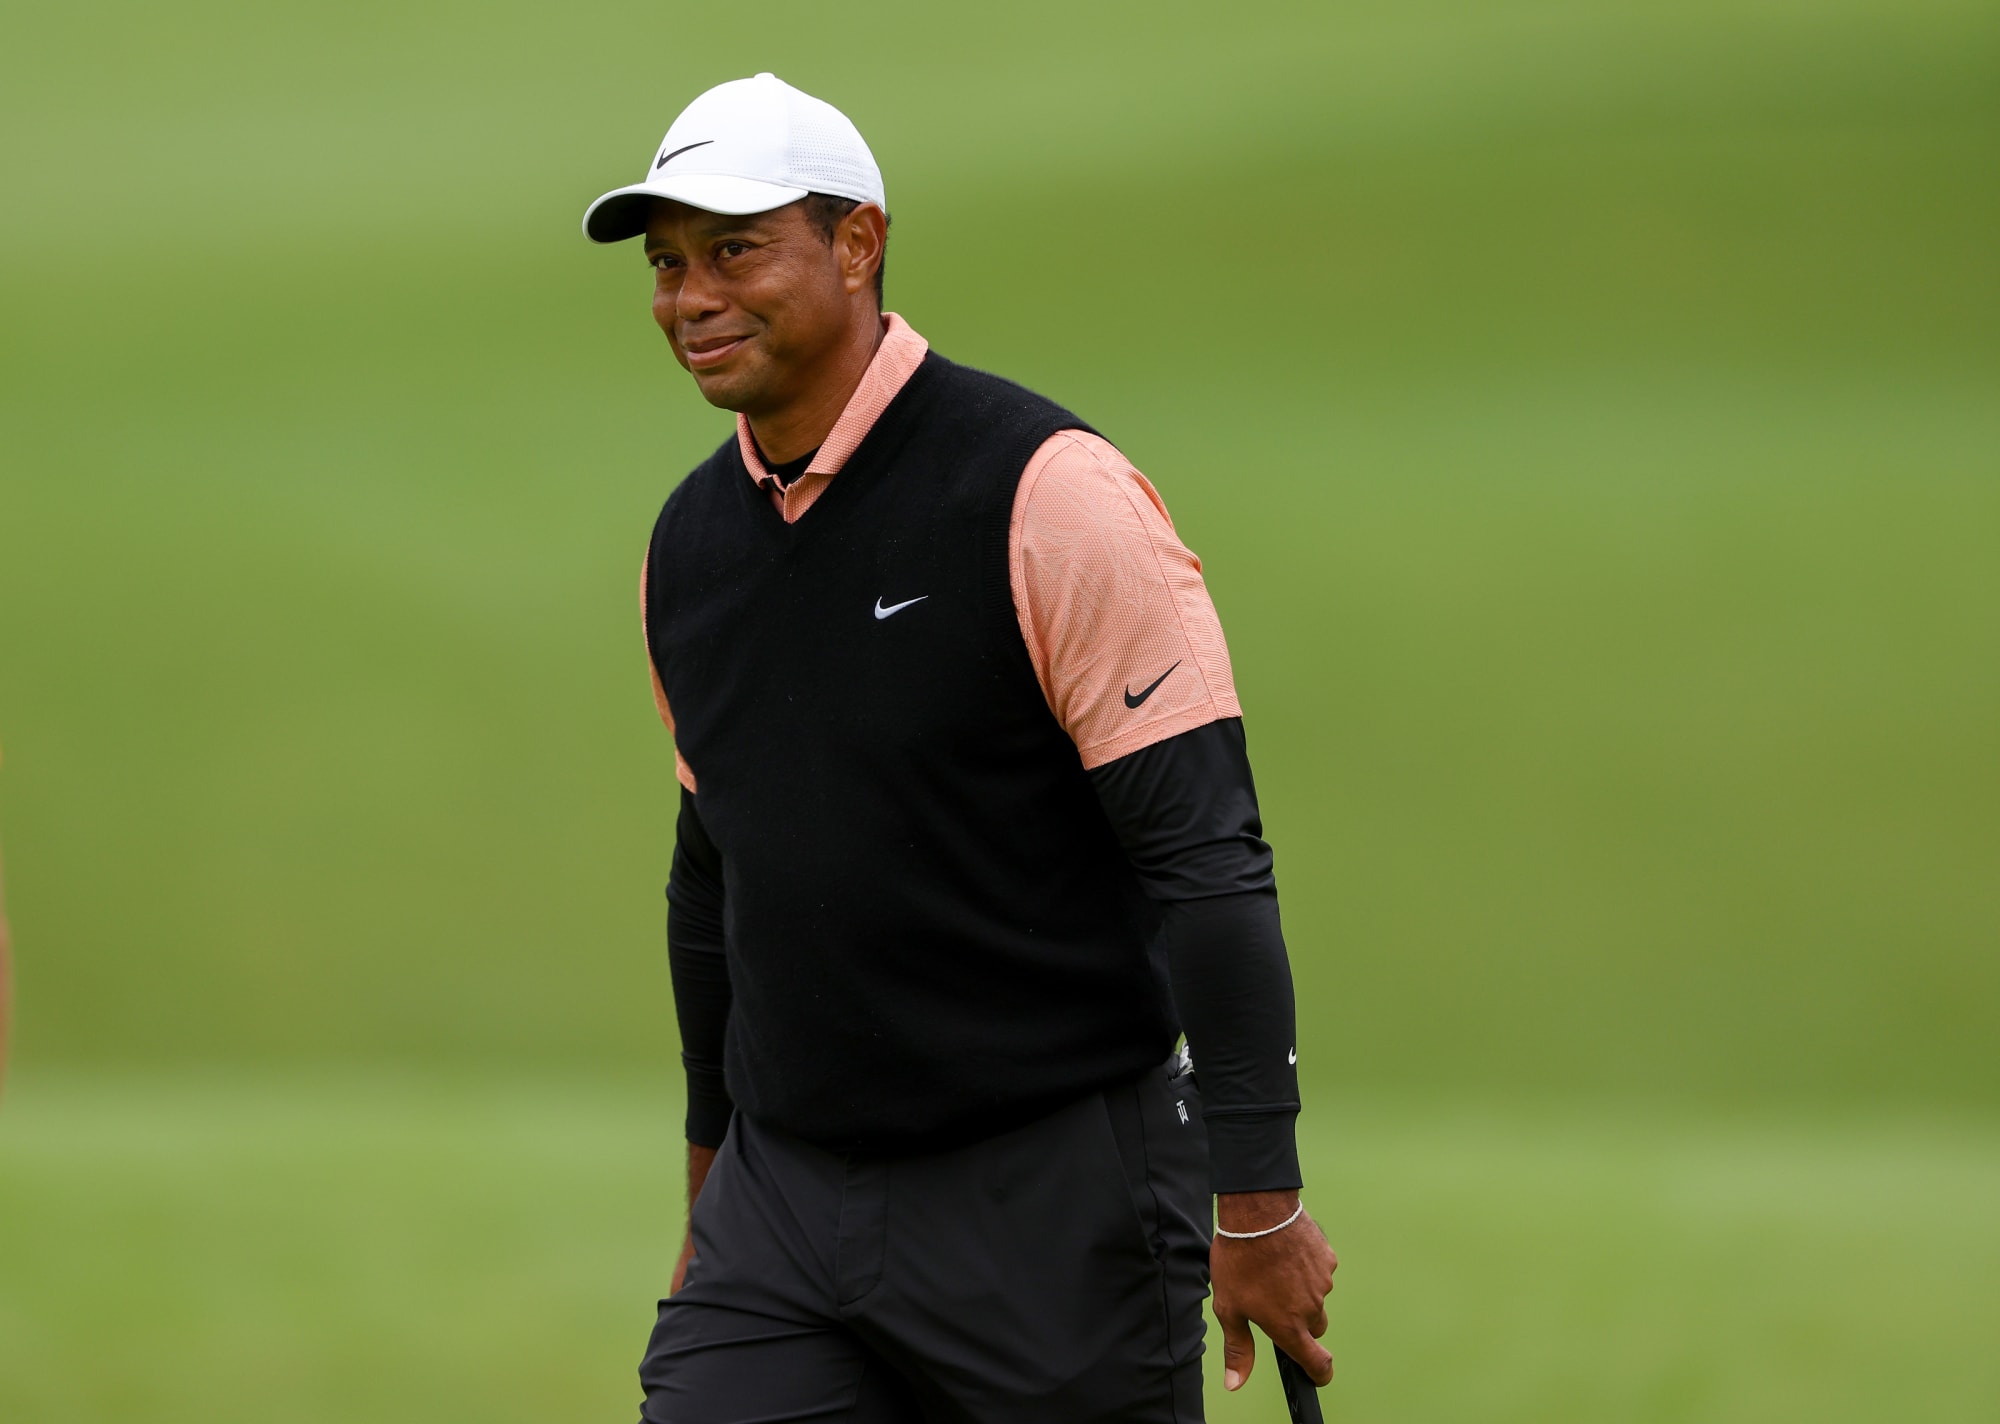 Tiger Woods leaves open possibility of withdrawing from final round at PGA Championship